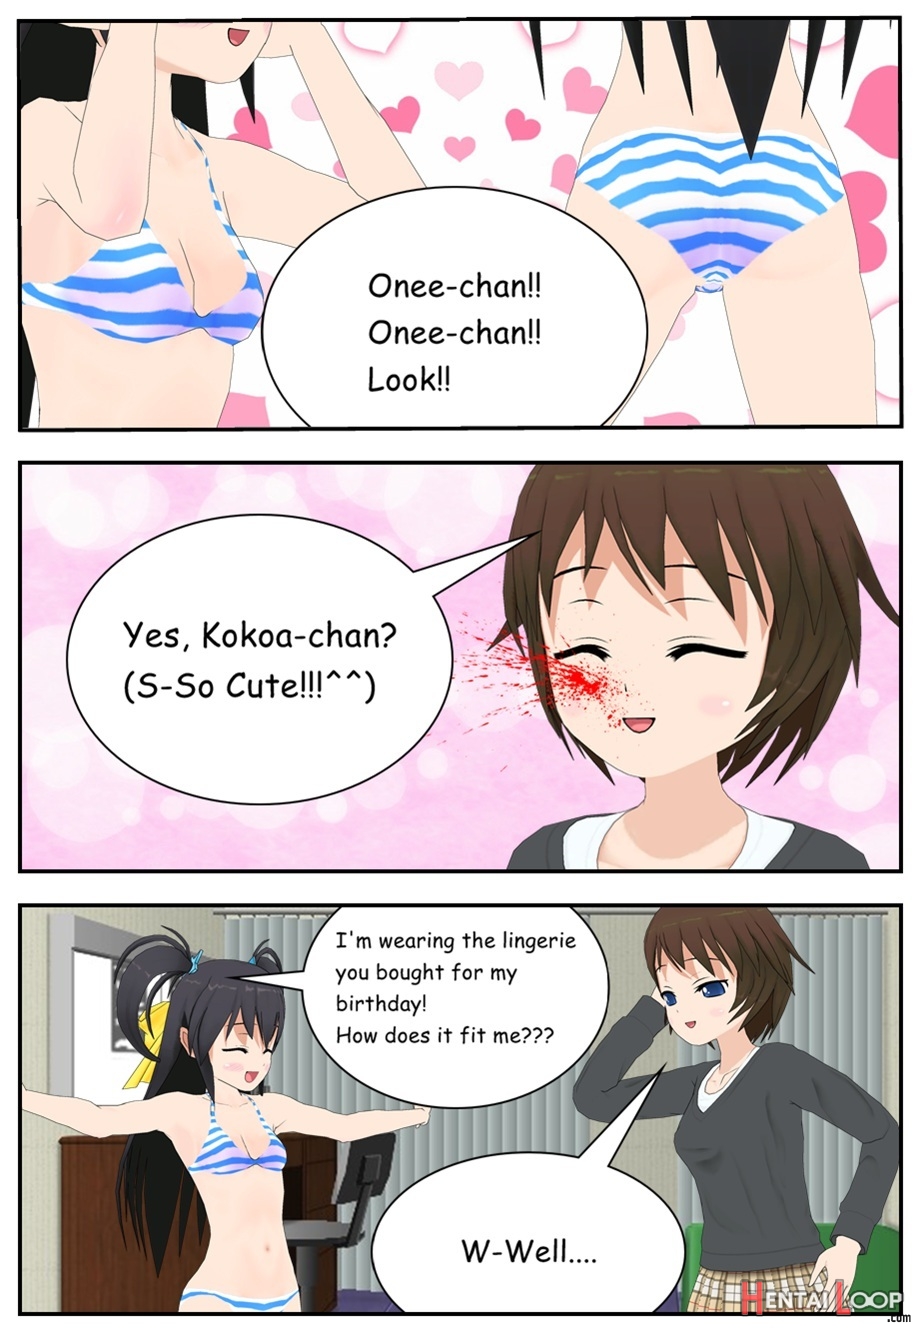 Onee-chan Is A Perv! page 3